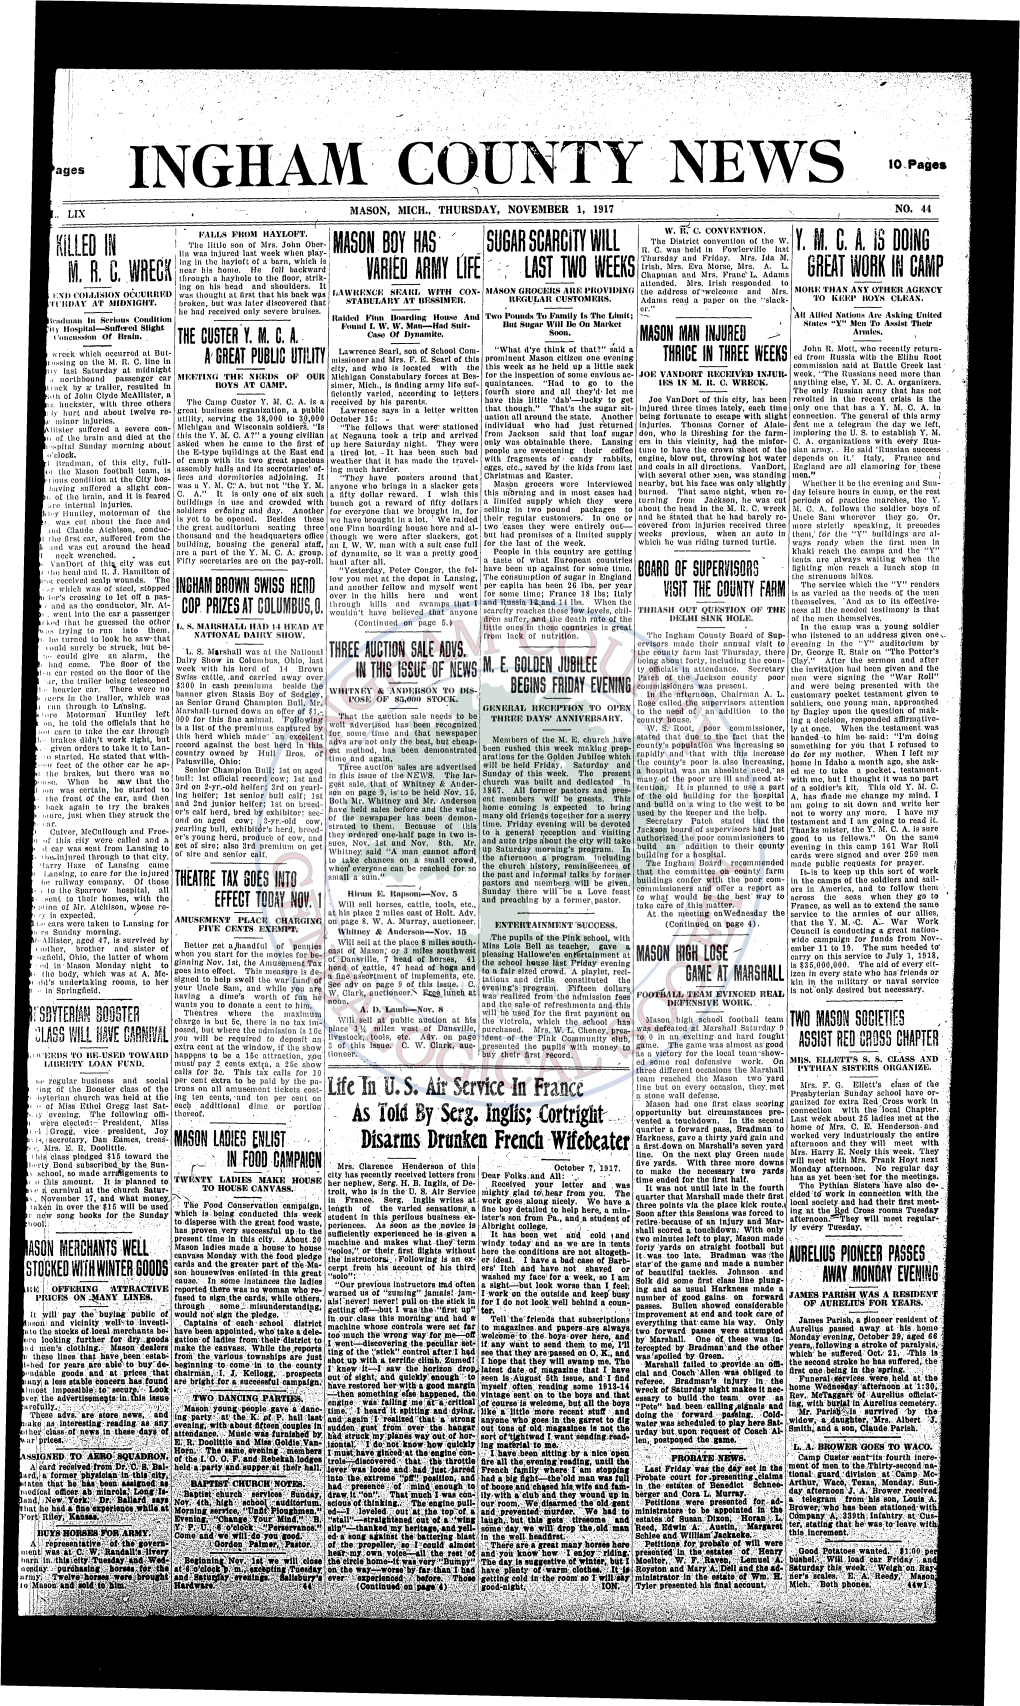 The Ingham County News, a Newspaper Printed and Circulated in MORTGAGE SALE